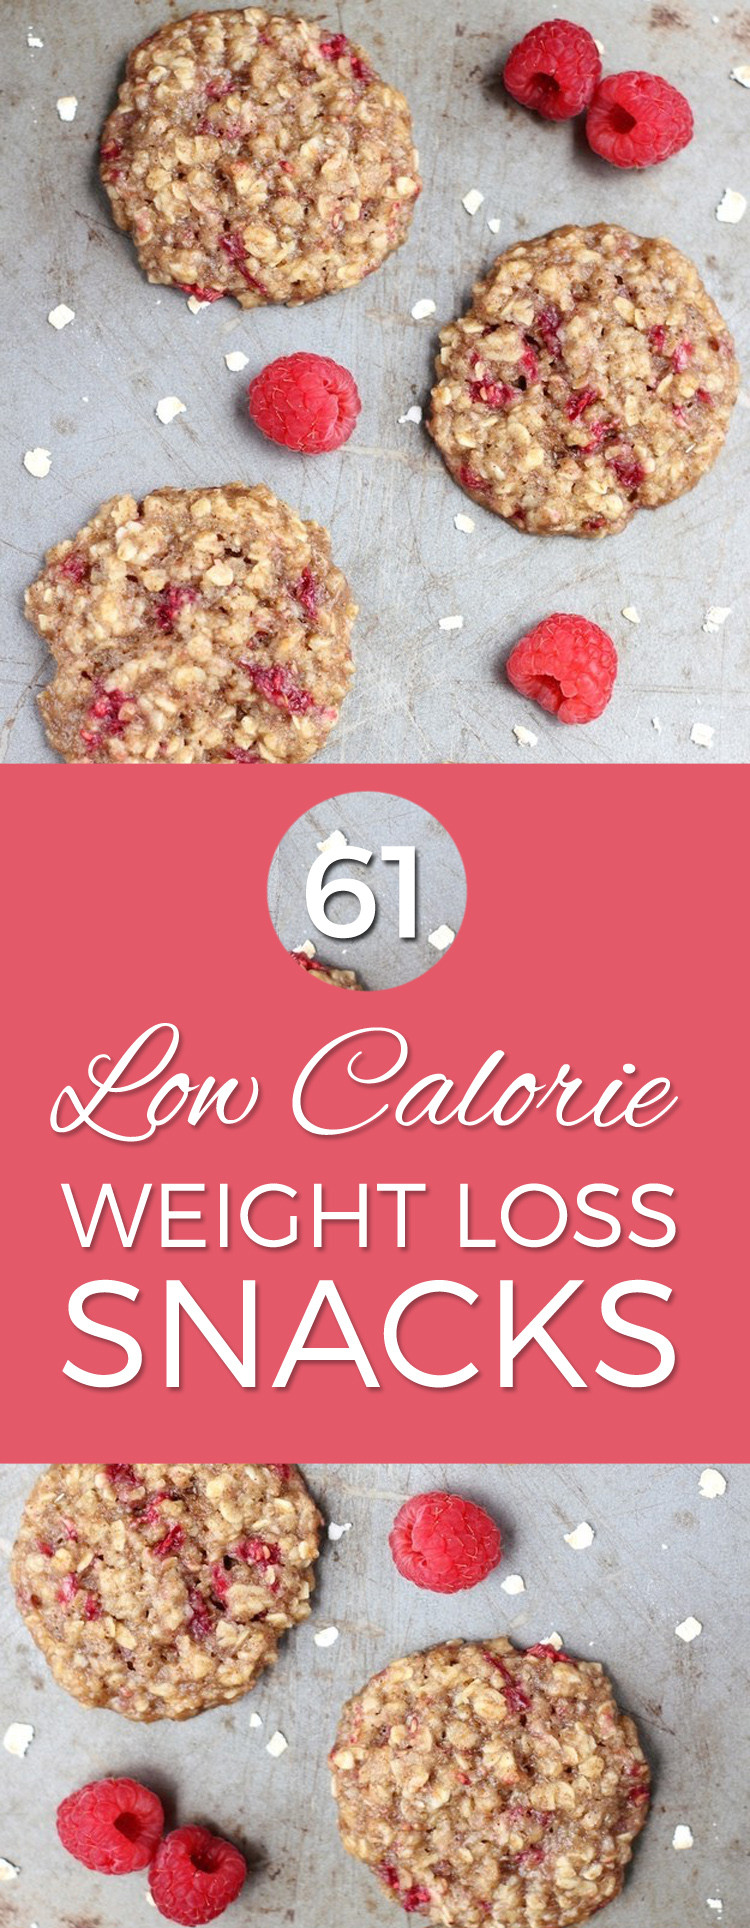 Low Calorie Snacks Recipes
 61 Super Healthy Super Low Calorie Snacks To Help You Lose